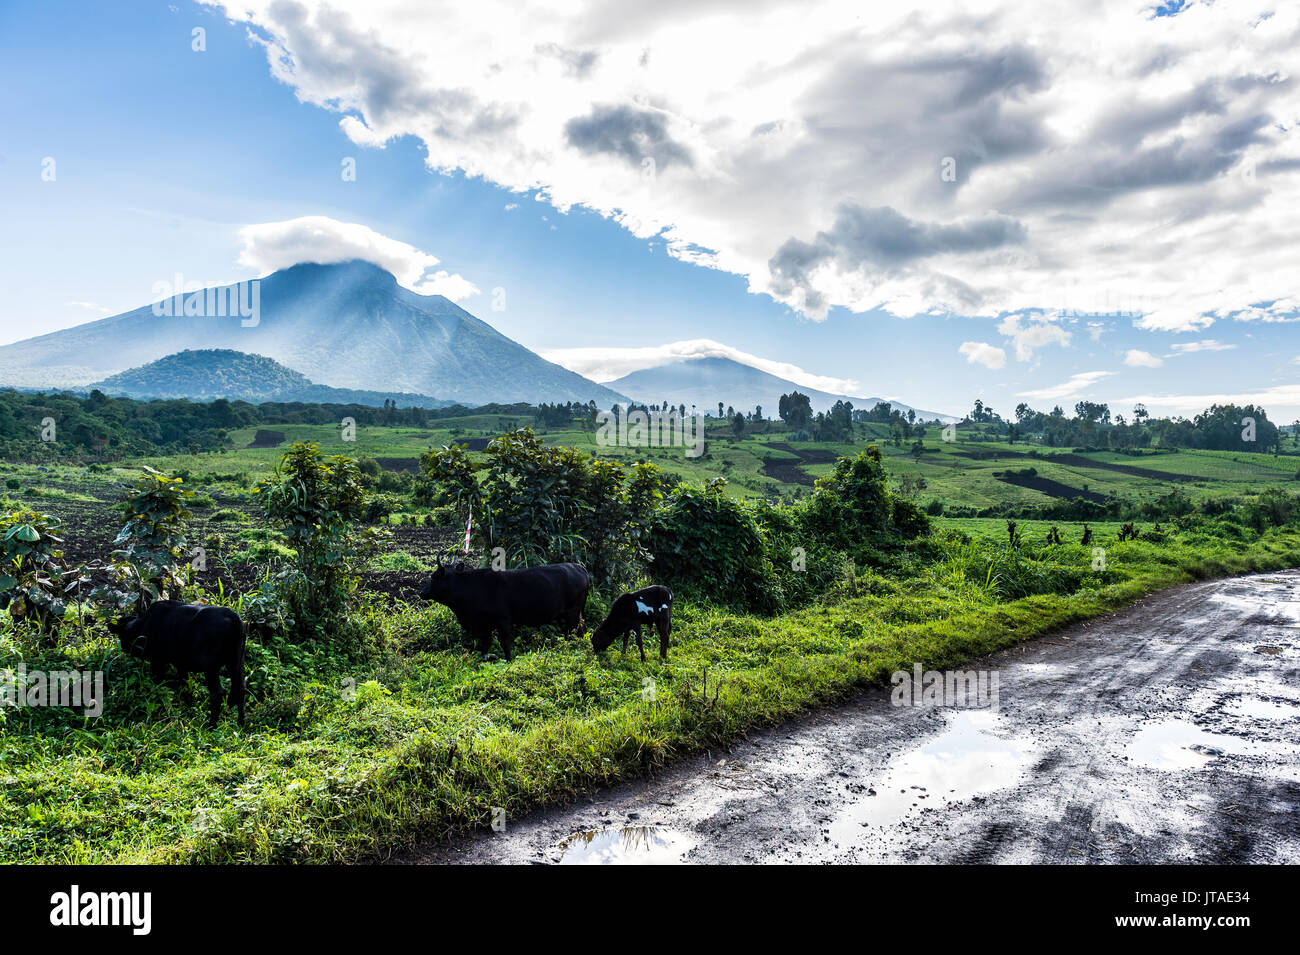 The volcanic mountain chain of the Virunga National Park after the rain, UNESCO, Democratic Republic of the Congo, Africa Stock Photo